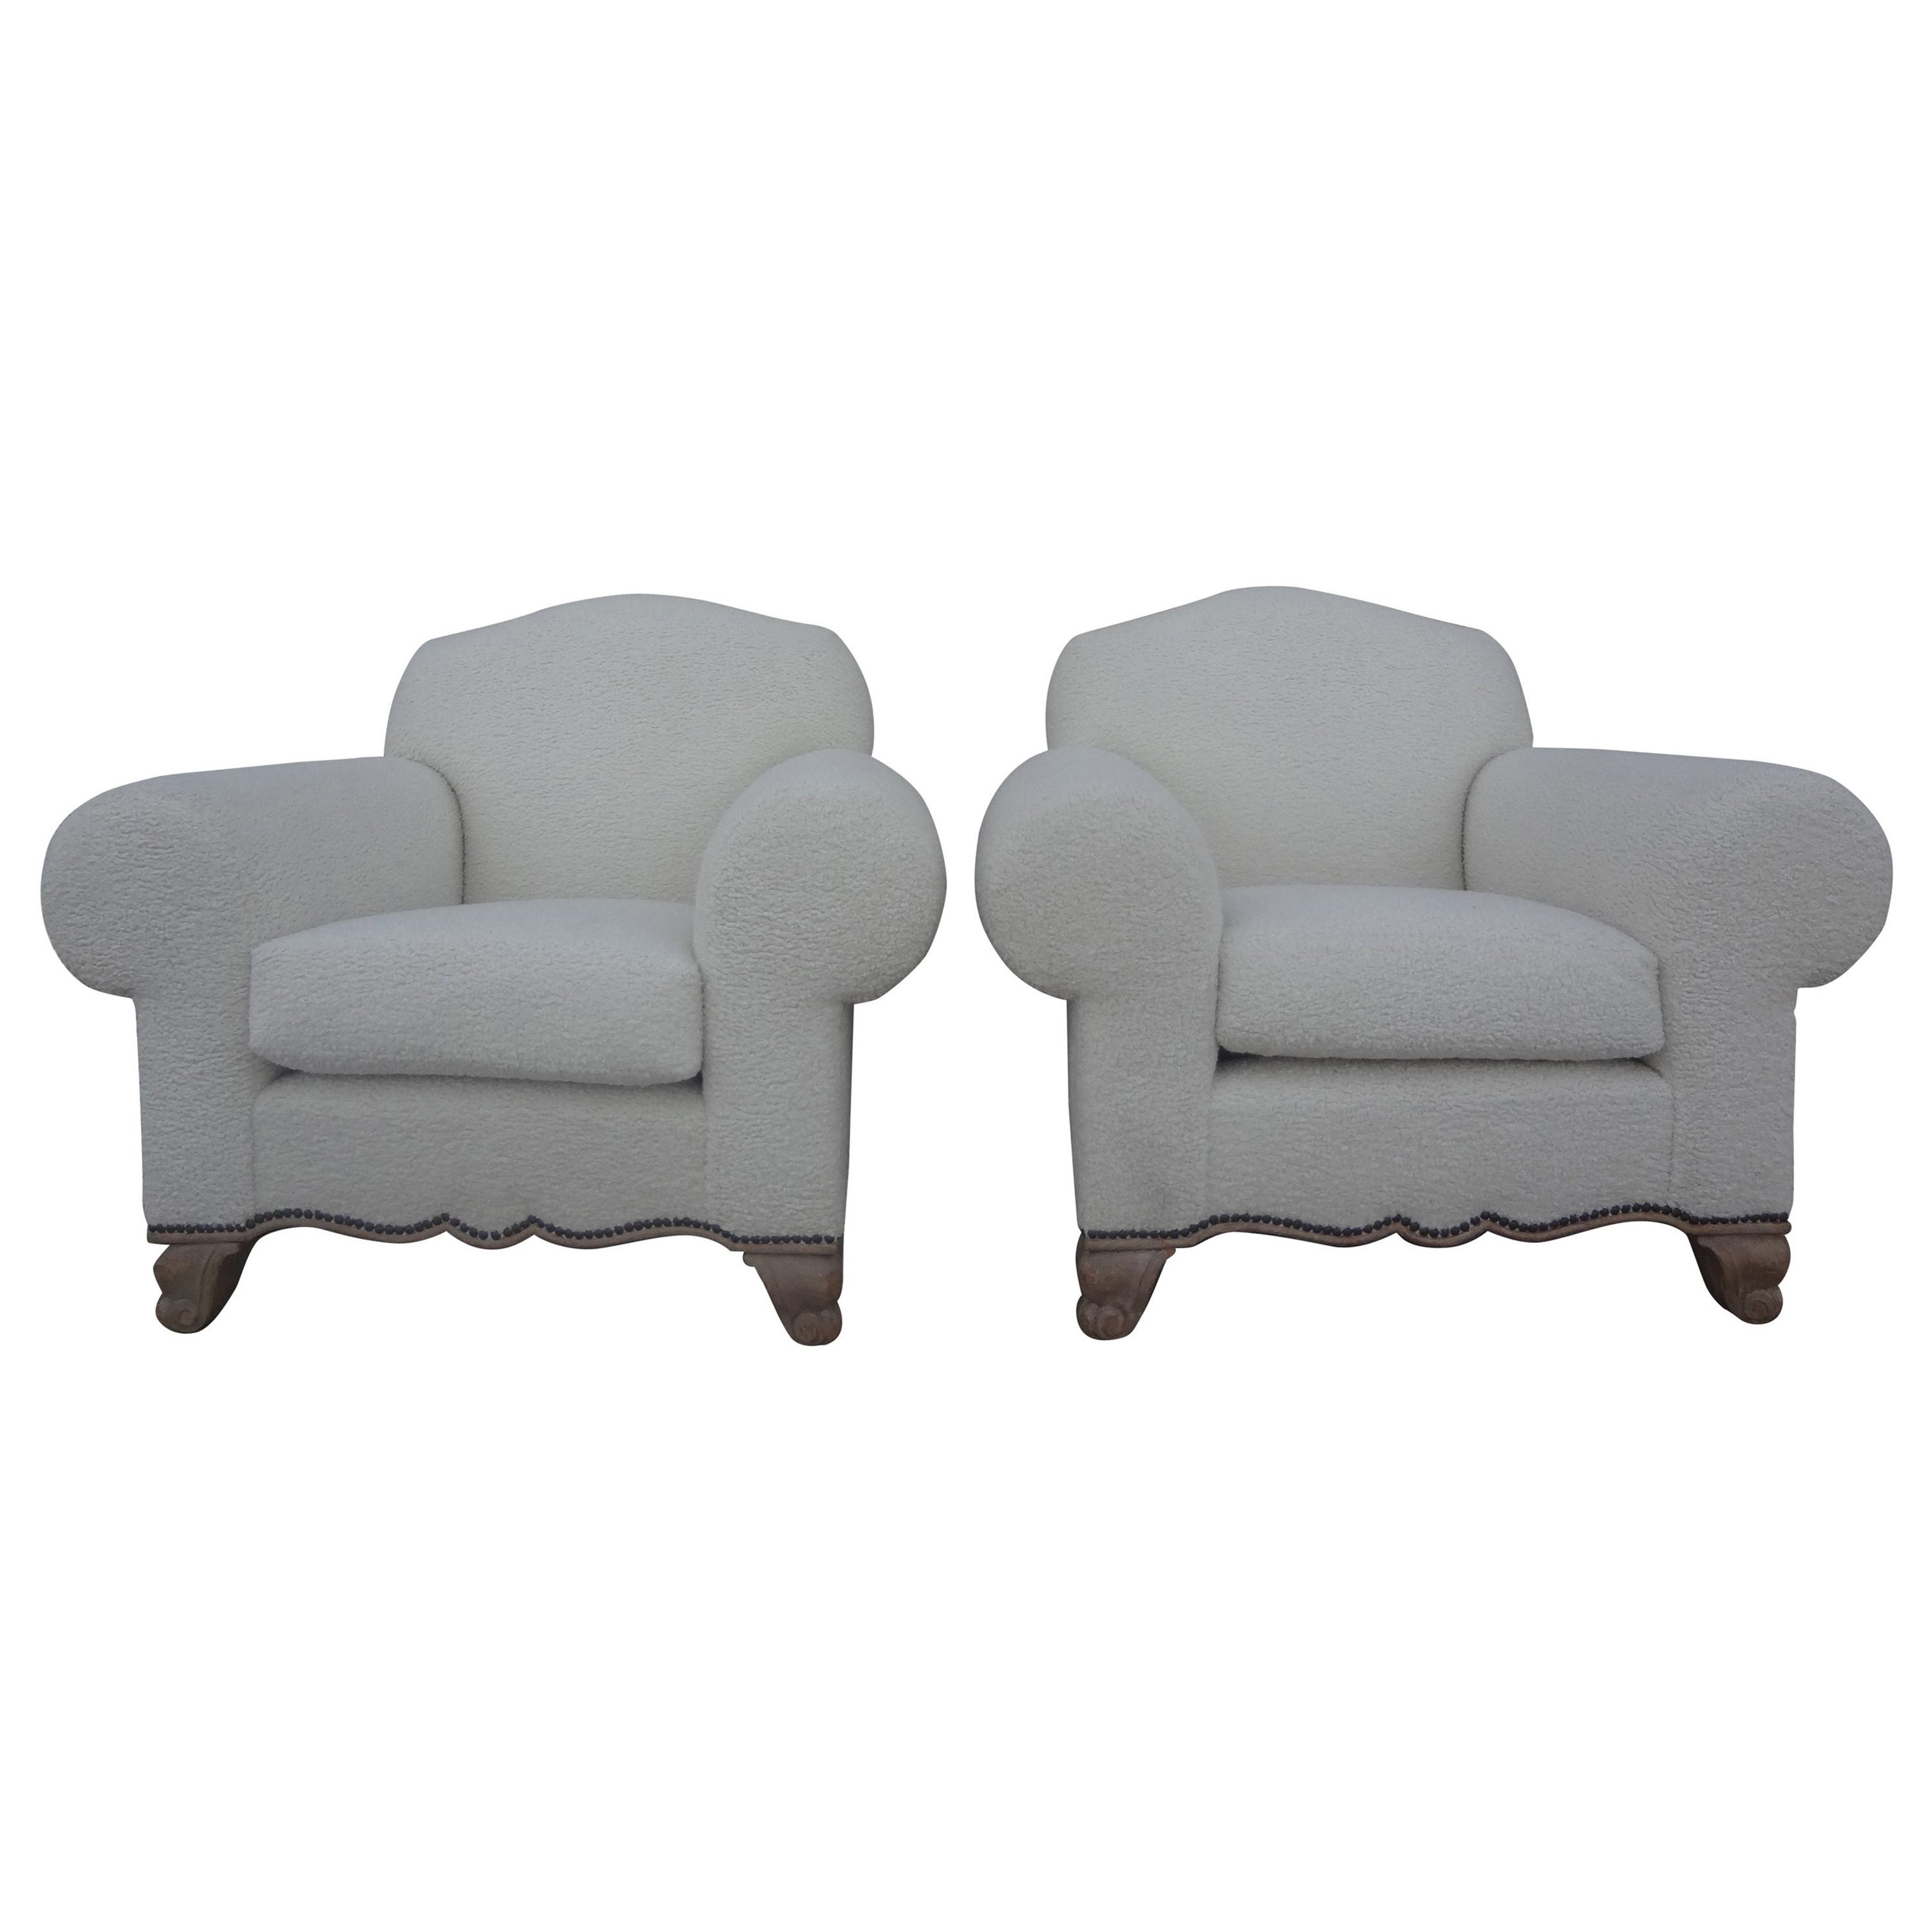 Pair of French Club Chairs or Lounge Chairs by Jacques Adnet